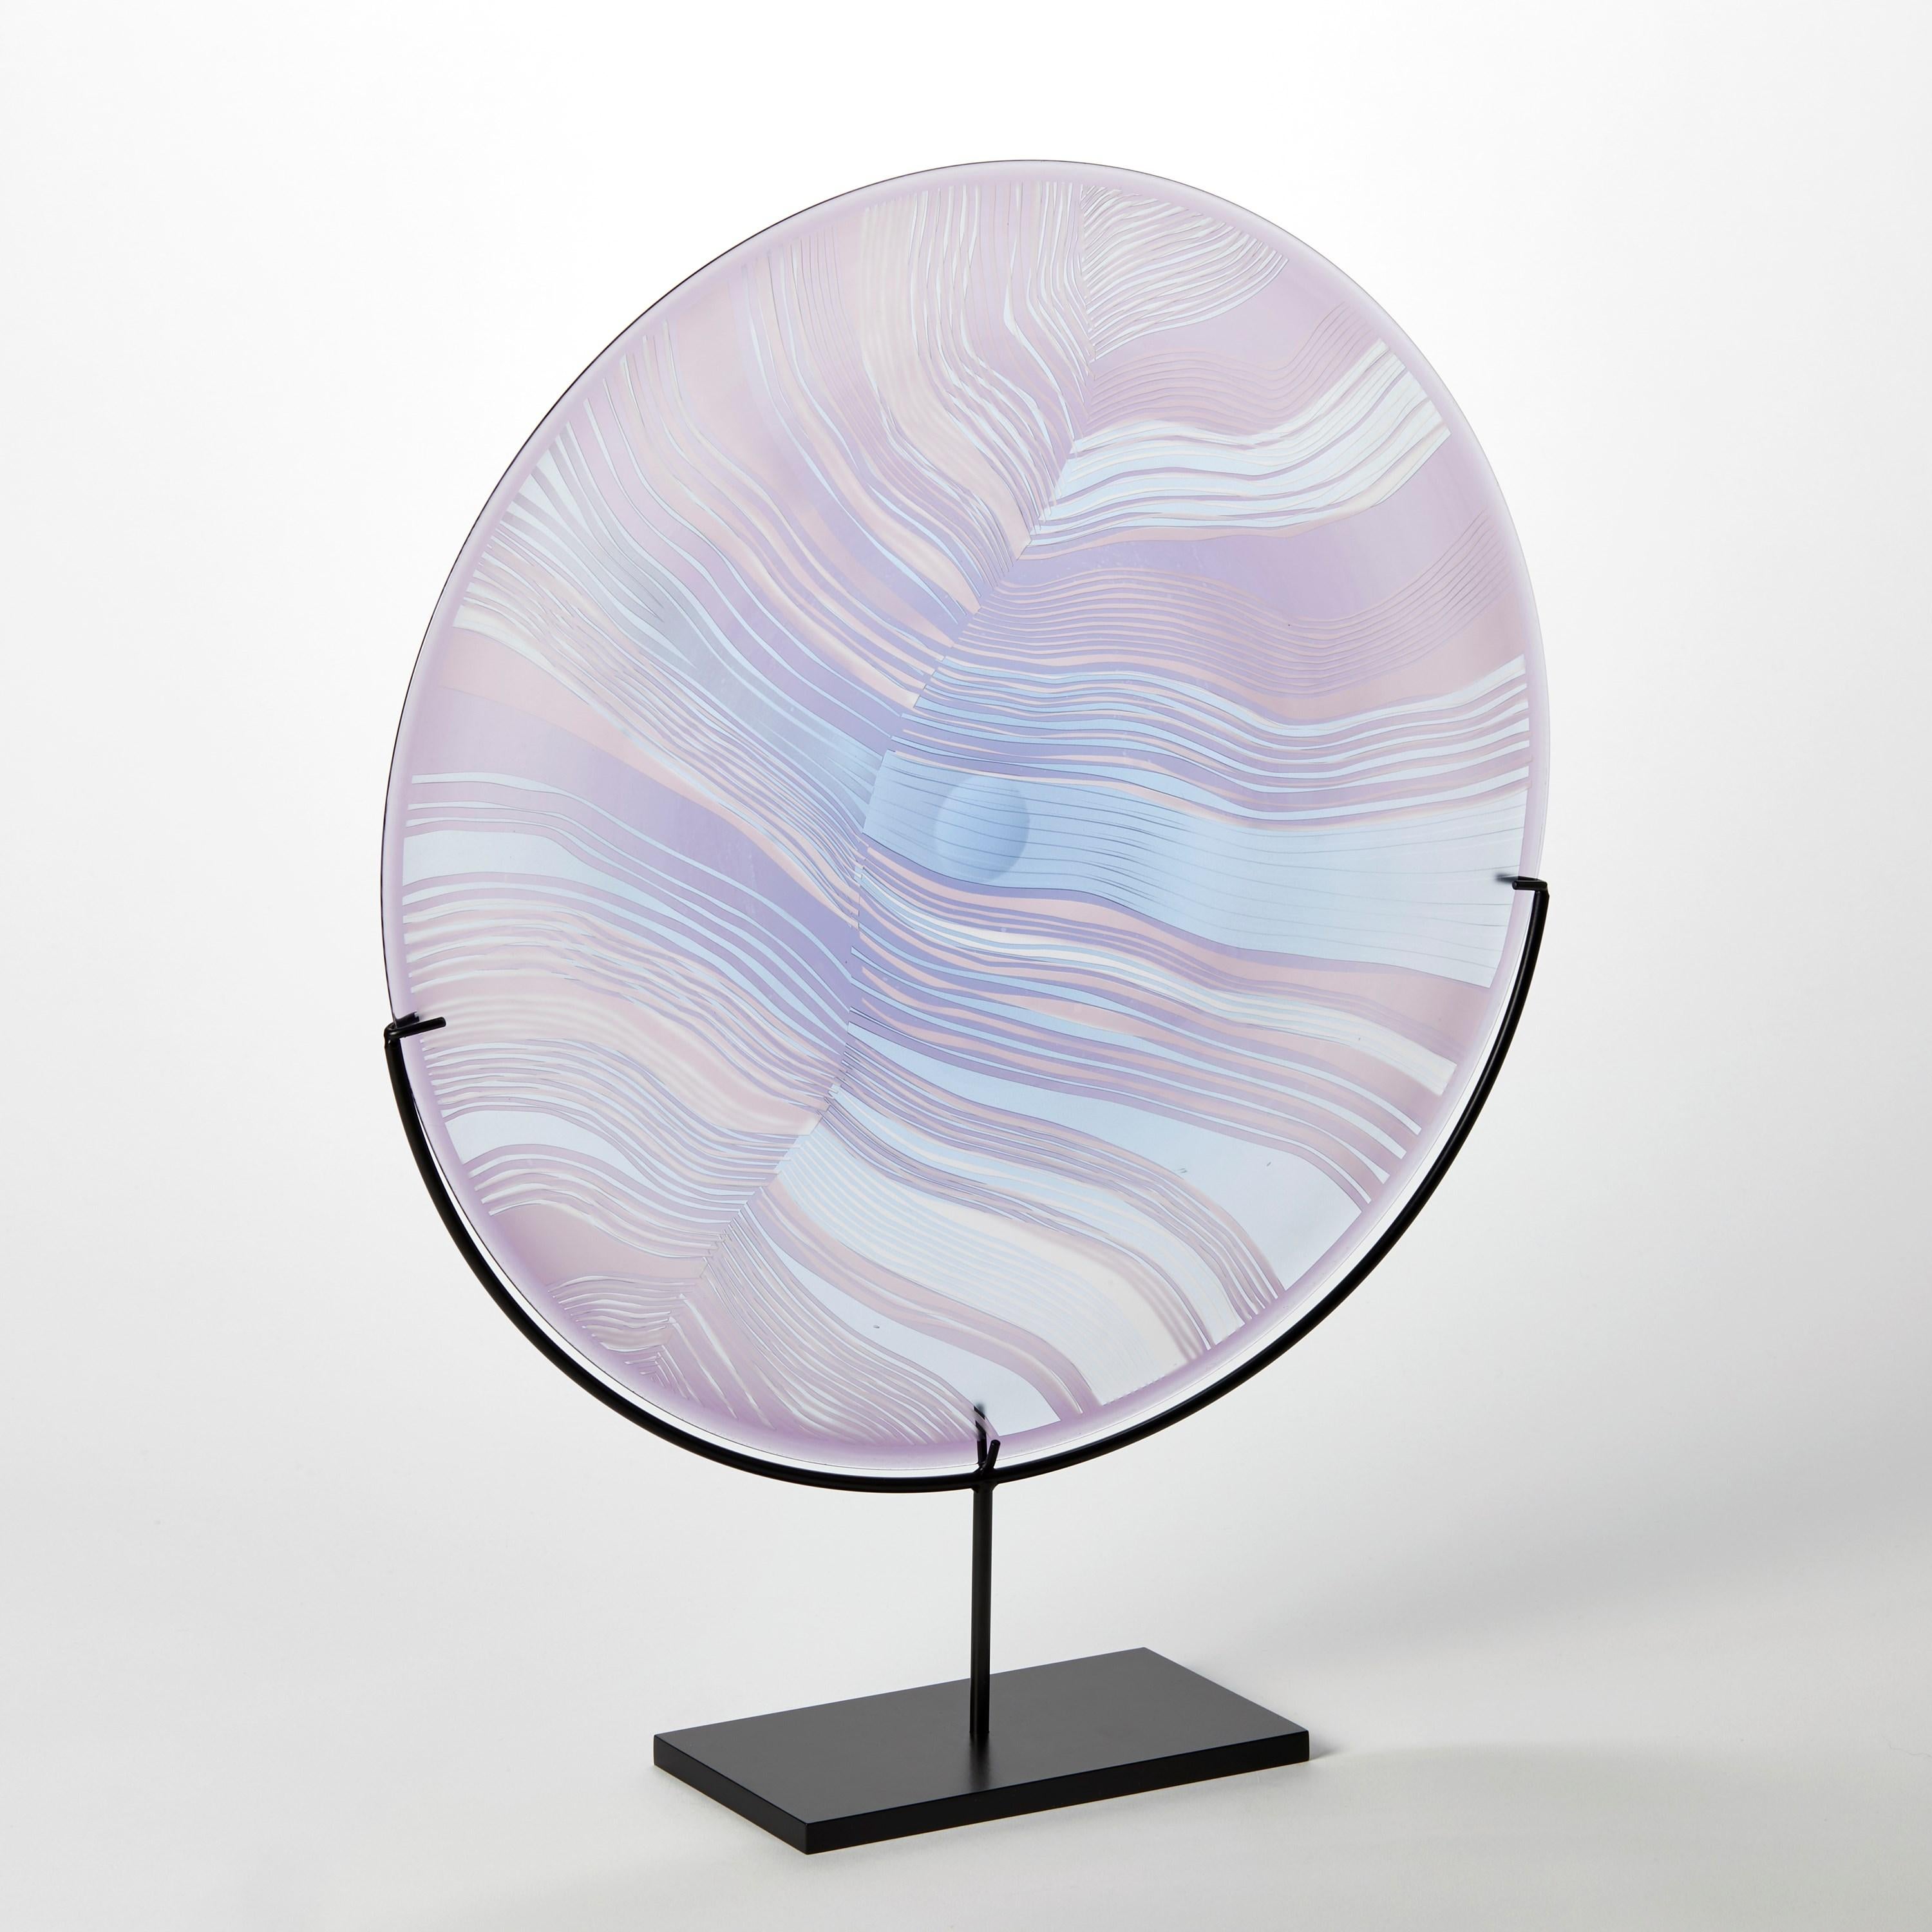 Organic Modern Solar Storm Sky Blue over Lilac, mounted linear cut glass artwork by Kate Jones For Sale